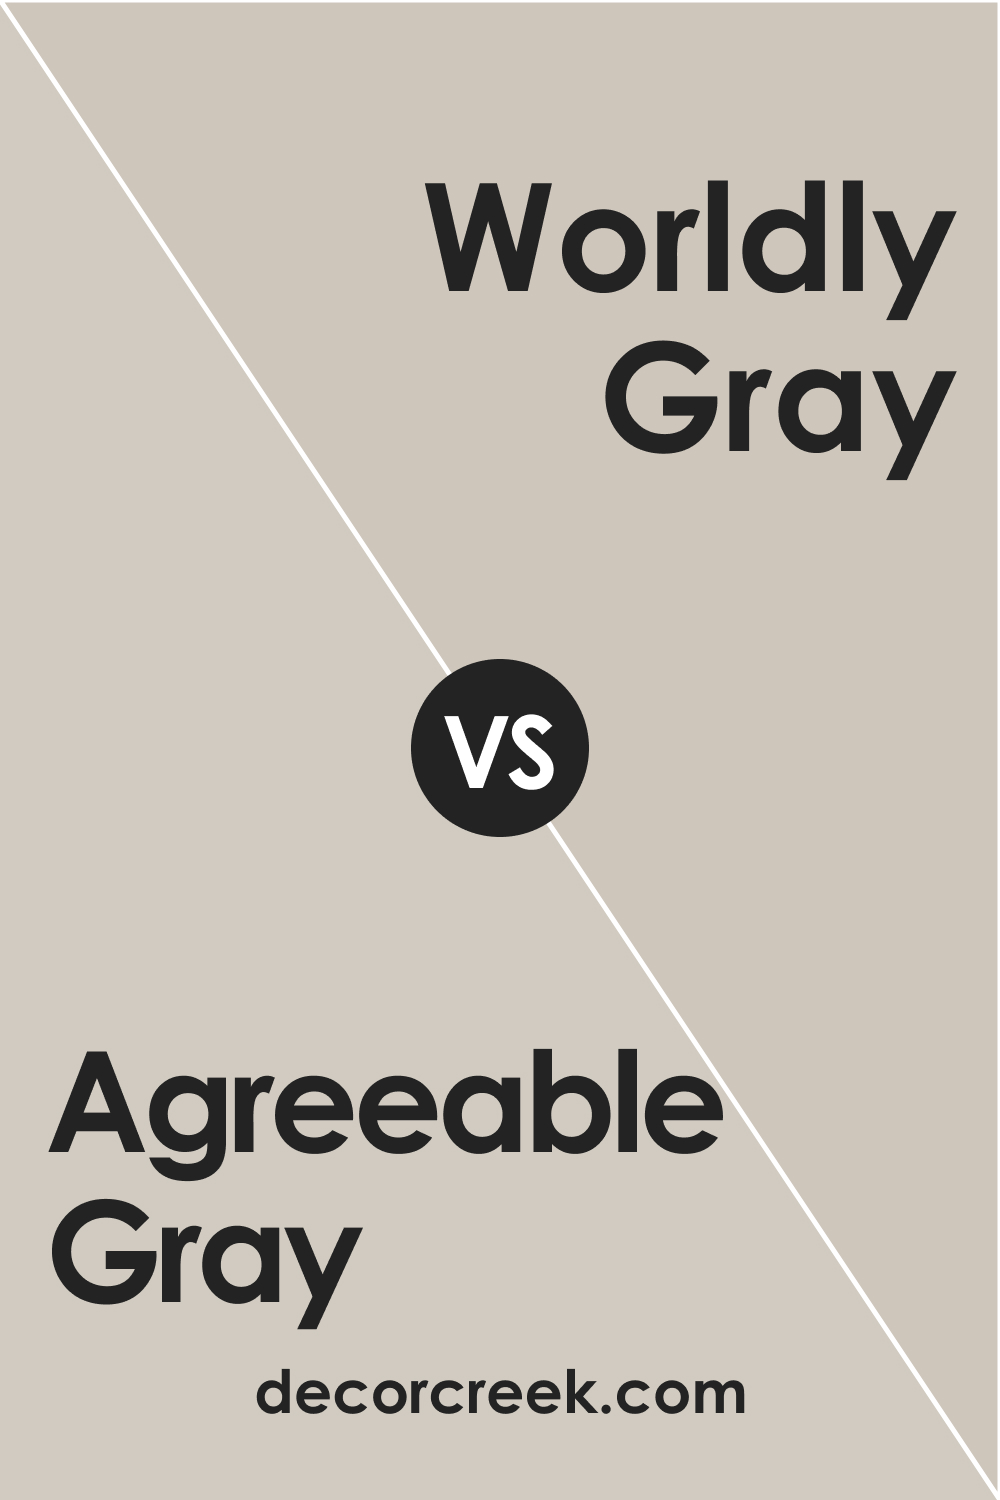 SW 7029 Agreeable Gray vs. SW 7043 Worldly Gray